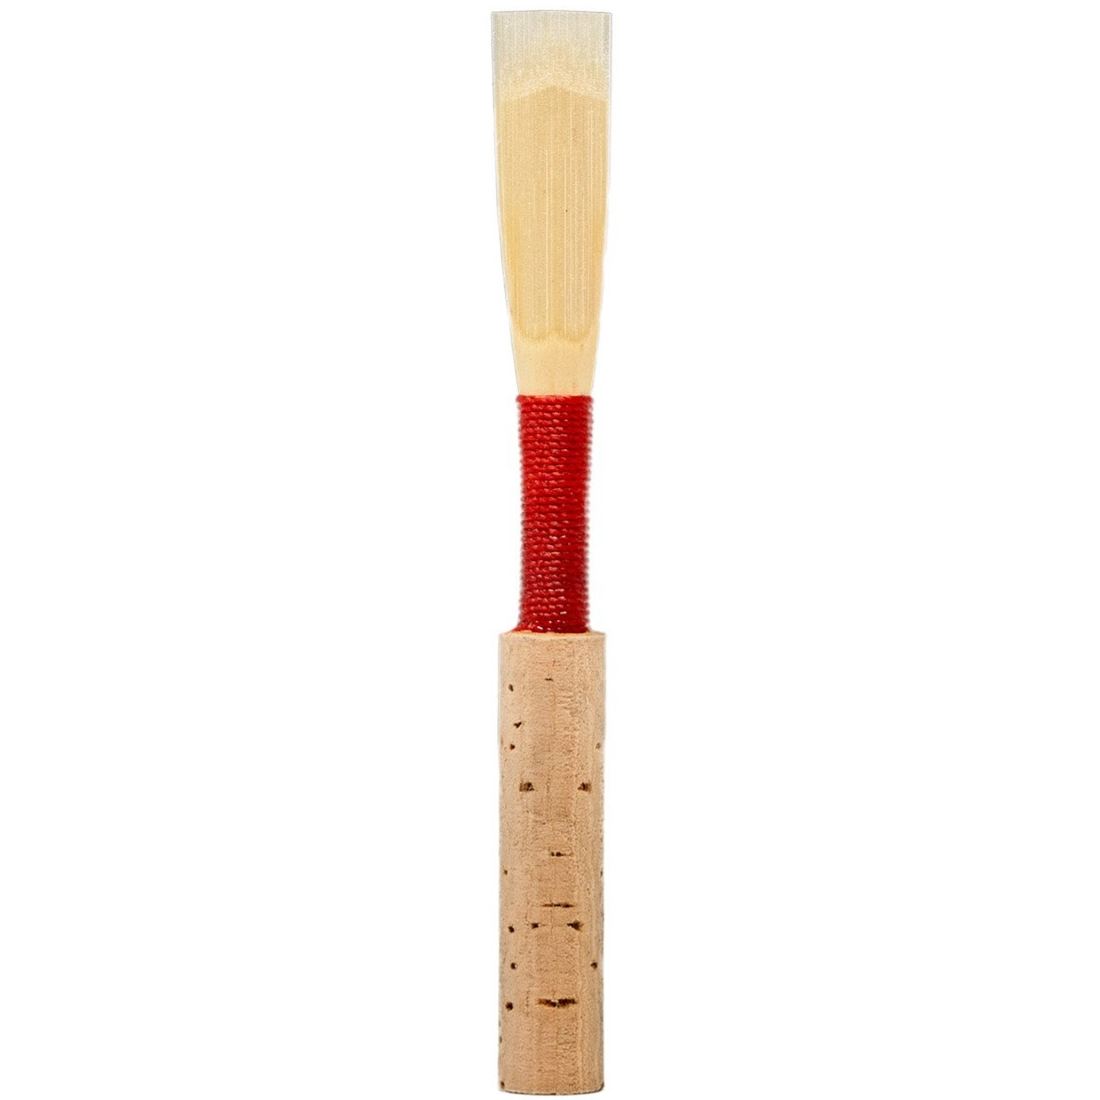 Jones Oboe Reed with red threading